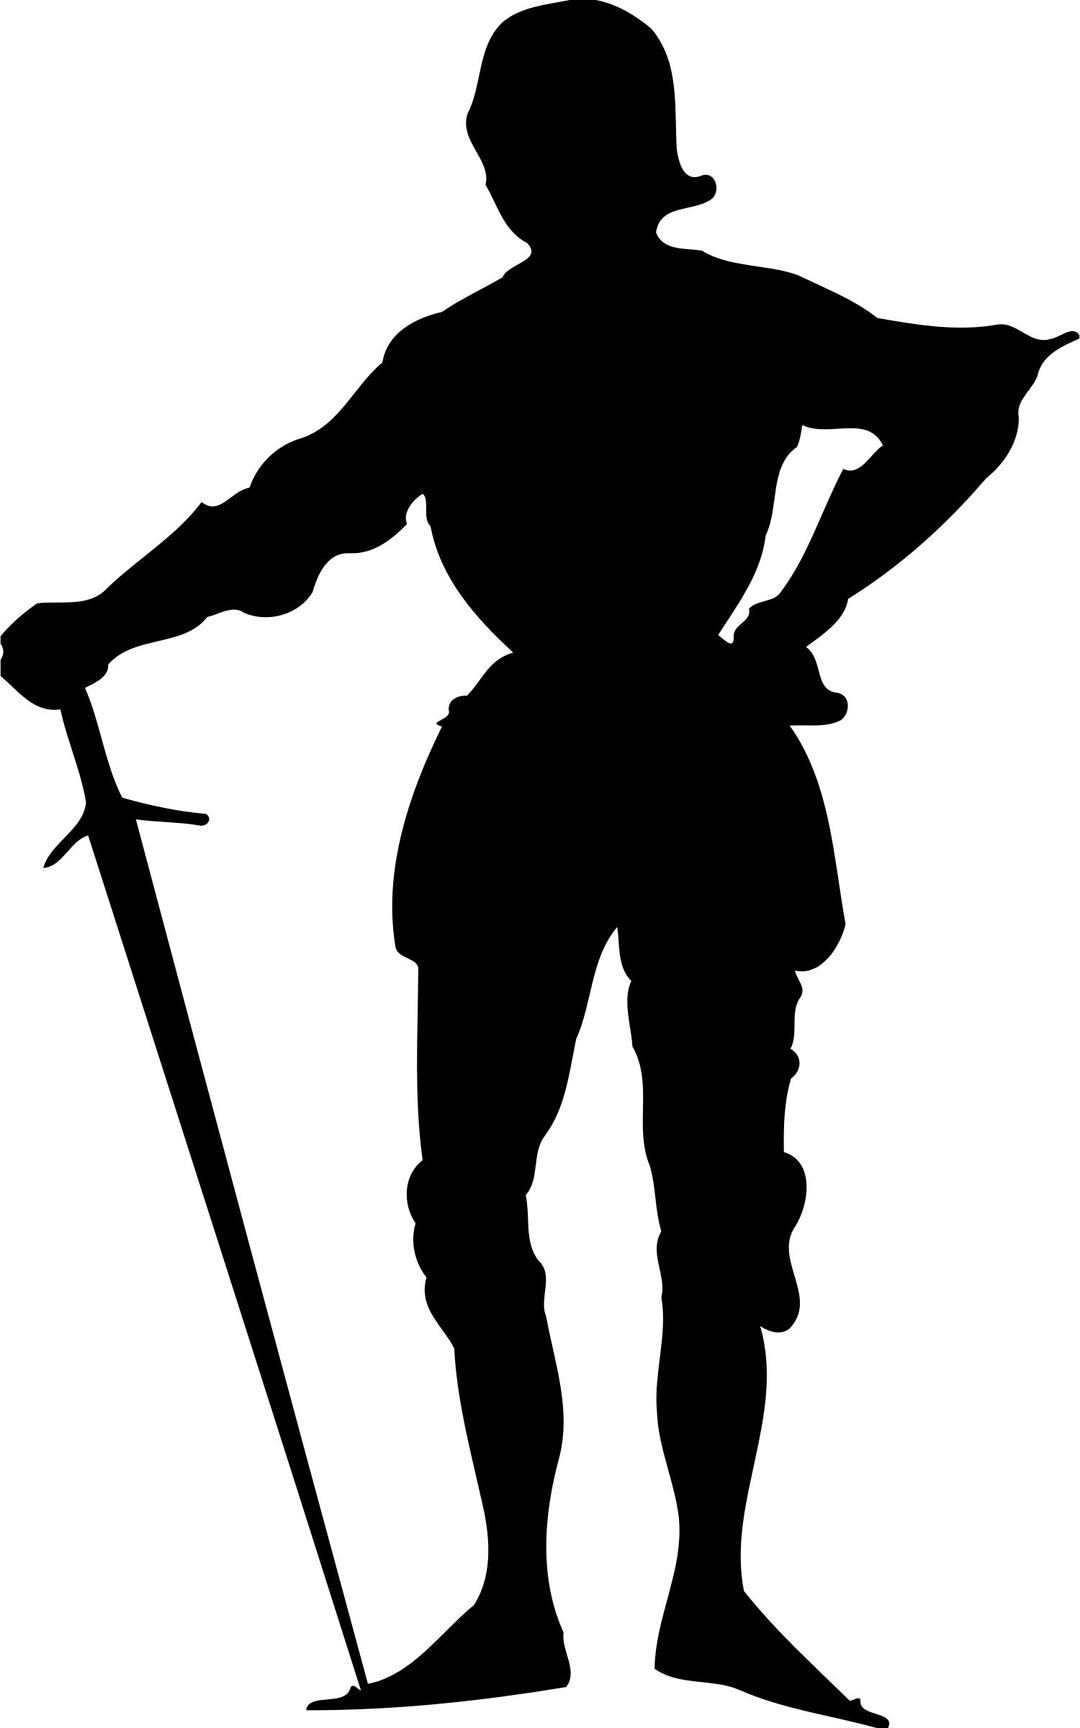 Knight silhouette 2 png transparent